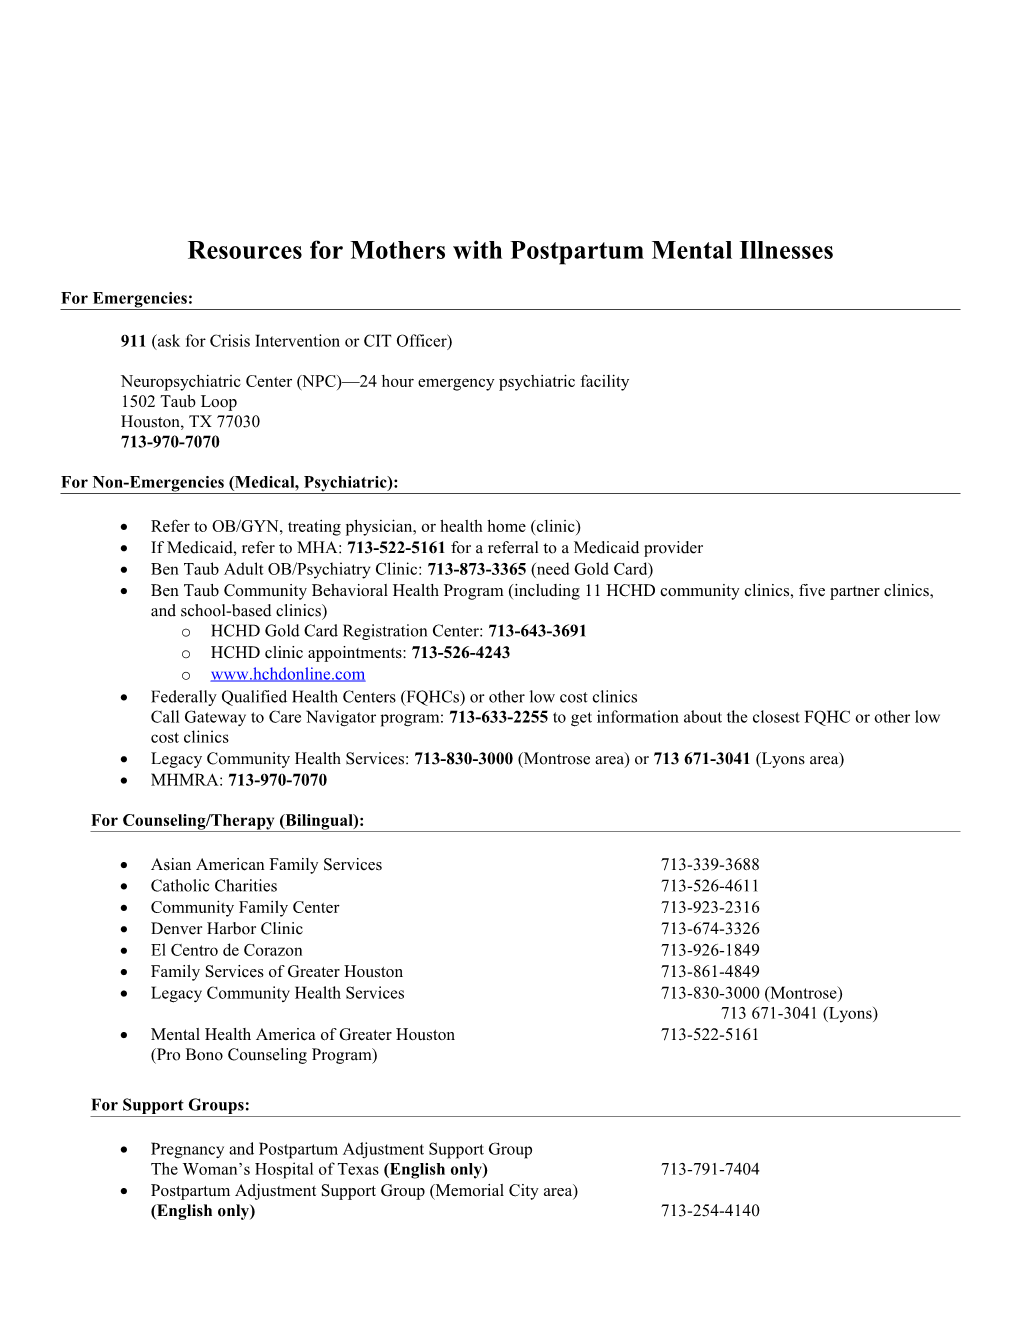 Resources for Mothers with Postpartum Mental Illnesses